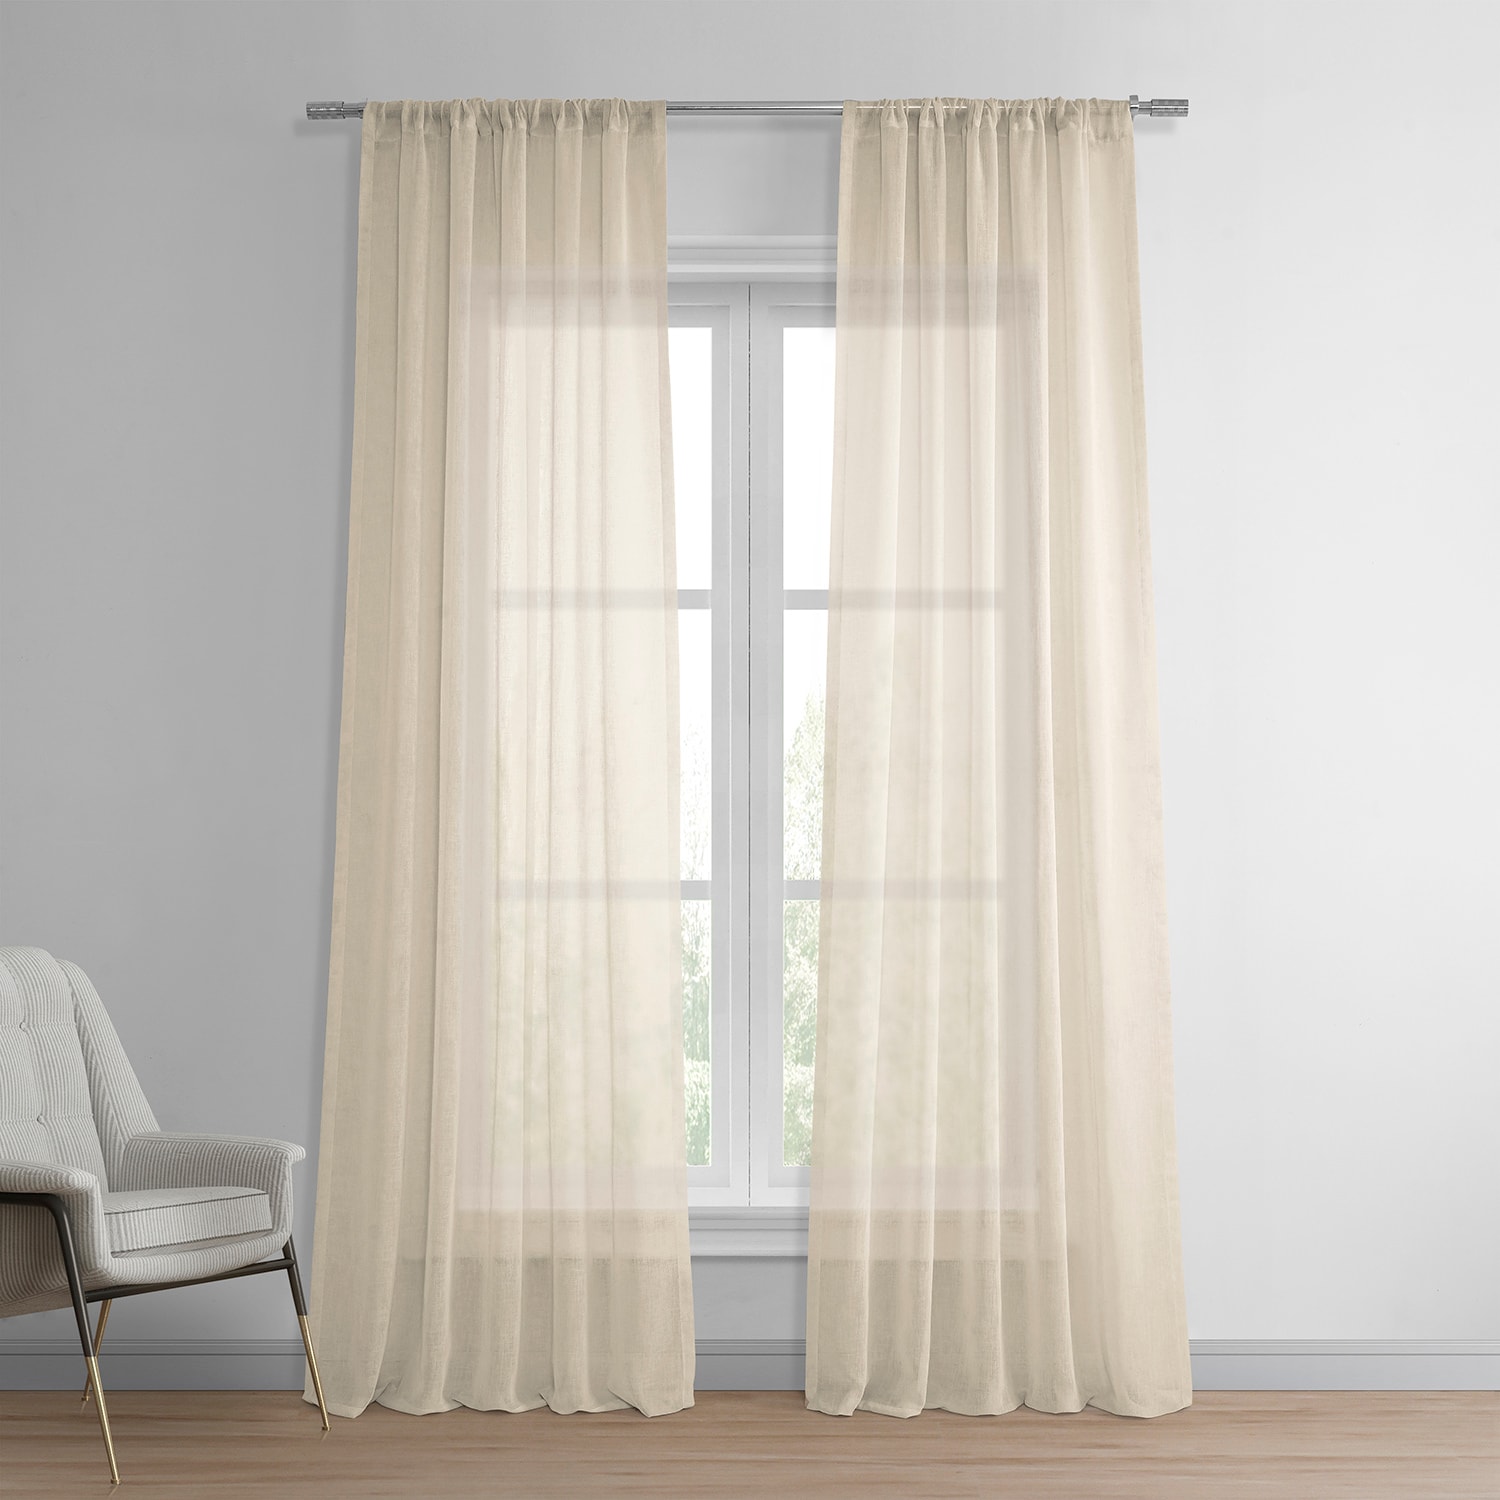 Cotton Seed Solid Faux Linen Sheer Curtain